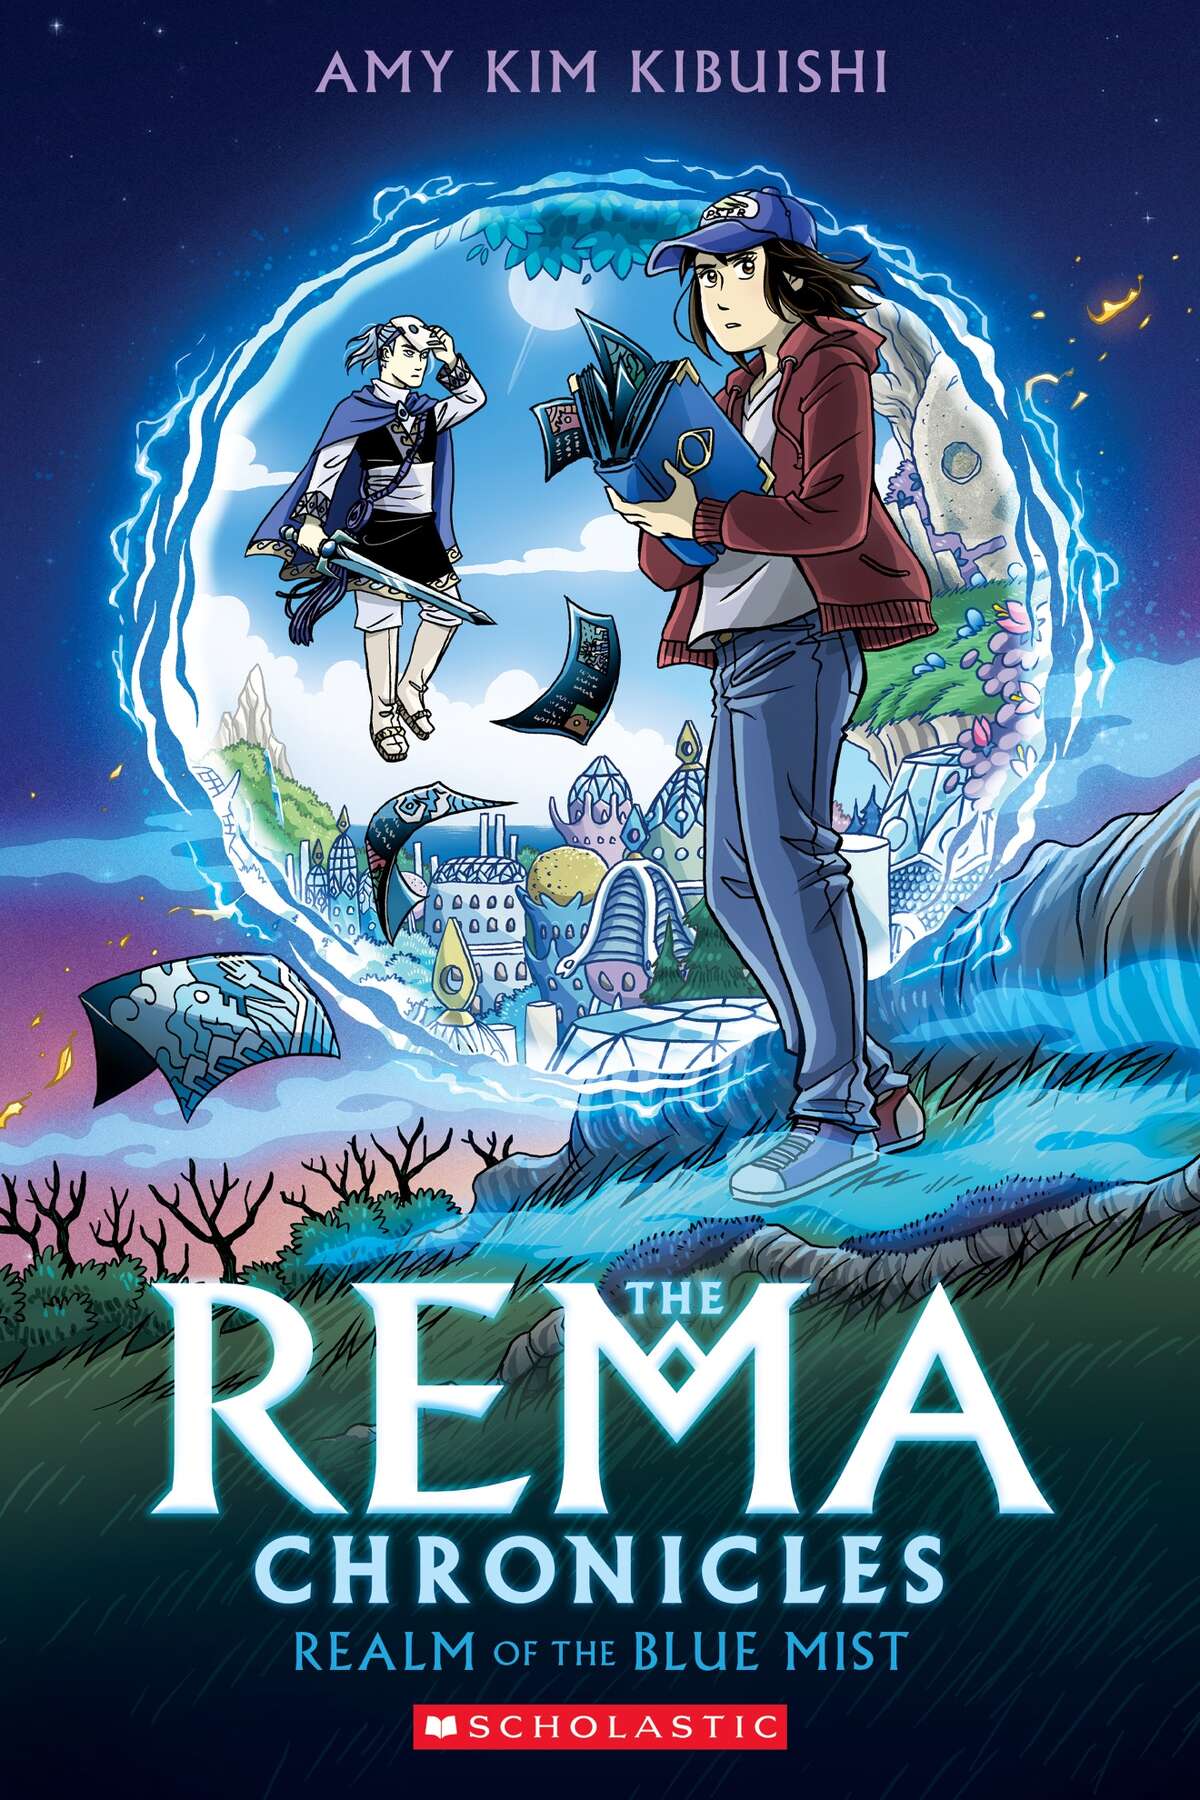 'The Rema Chronicles' by Amy Kim Kibushi, book cover.